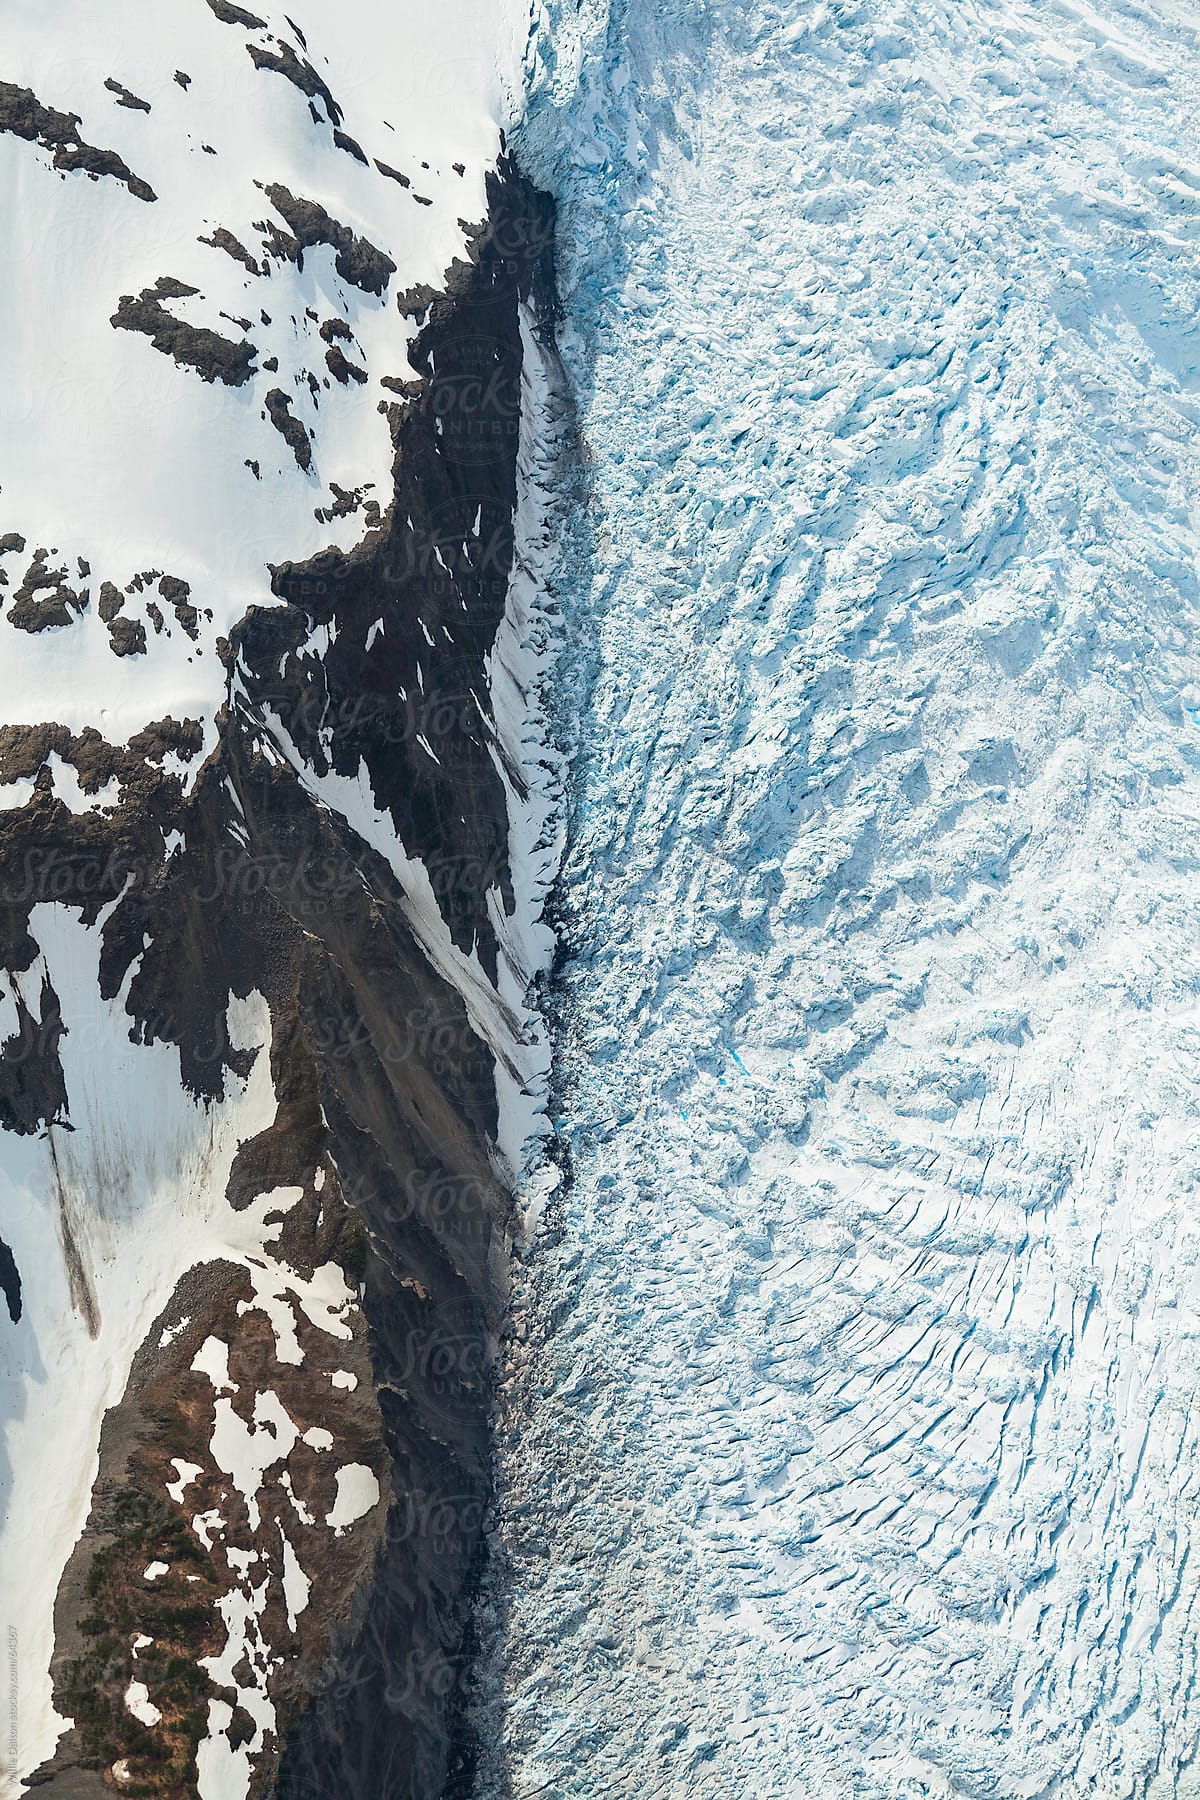 A Glacial Moraine as seen from the Air